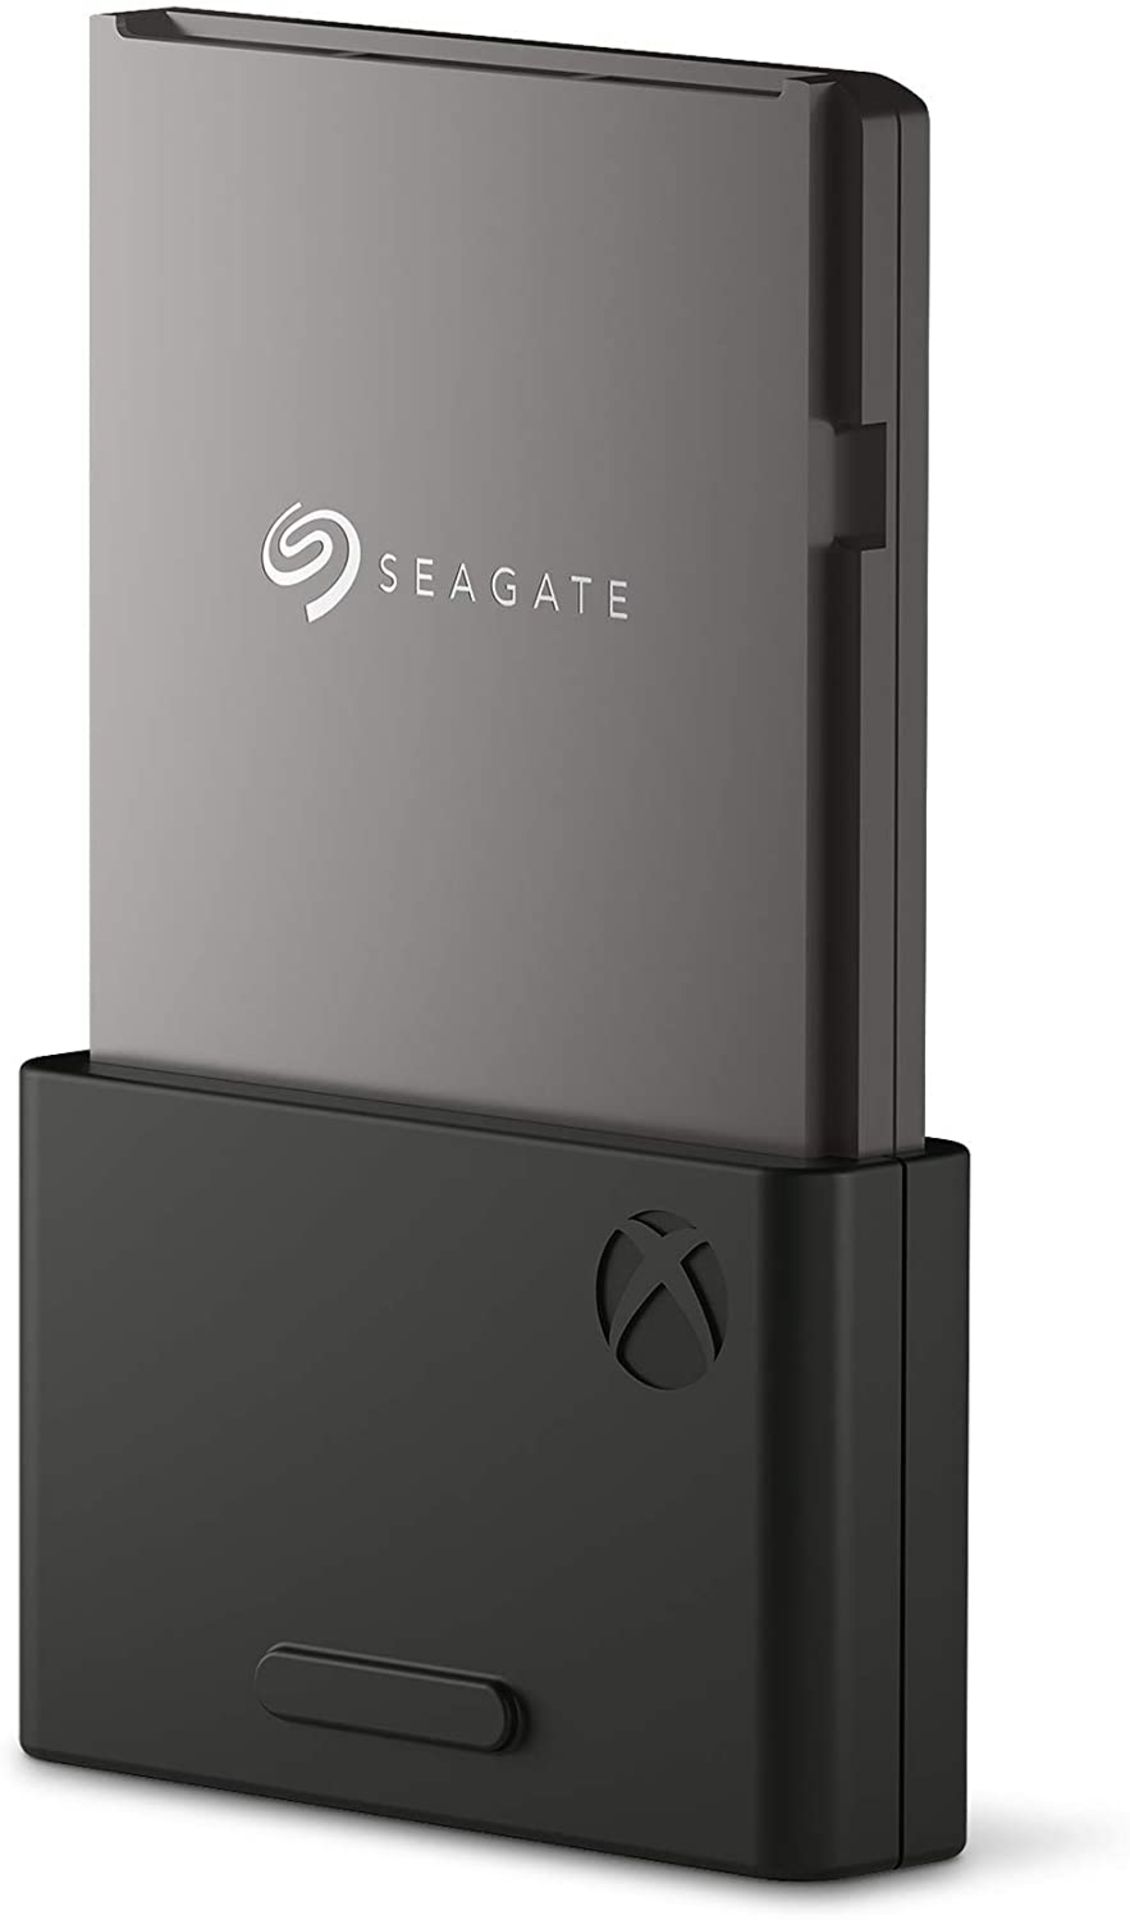 SEAGATE 1TB STORAGE EXPANSON CARD RRP £199.99Condition ReportAppraisal Available on Request - All